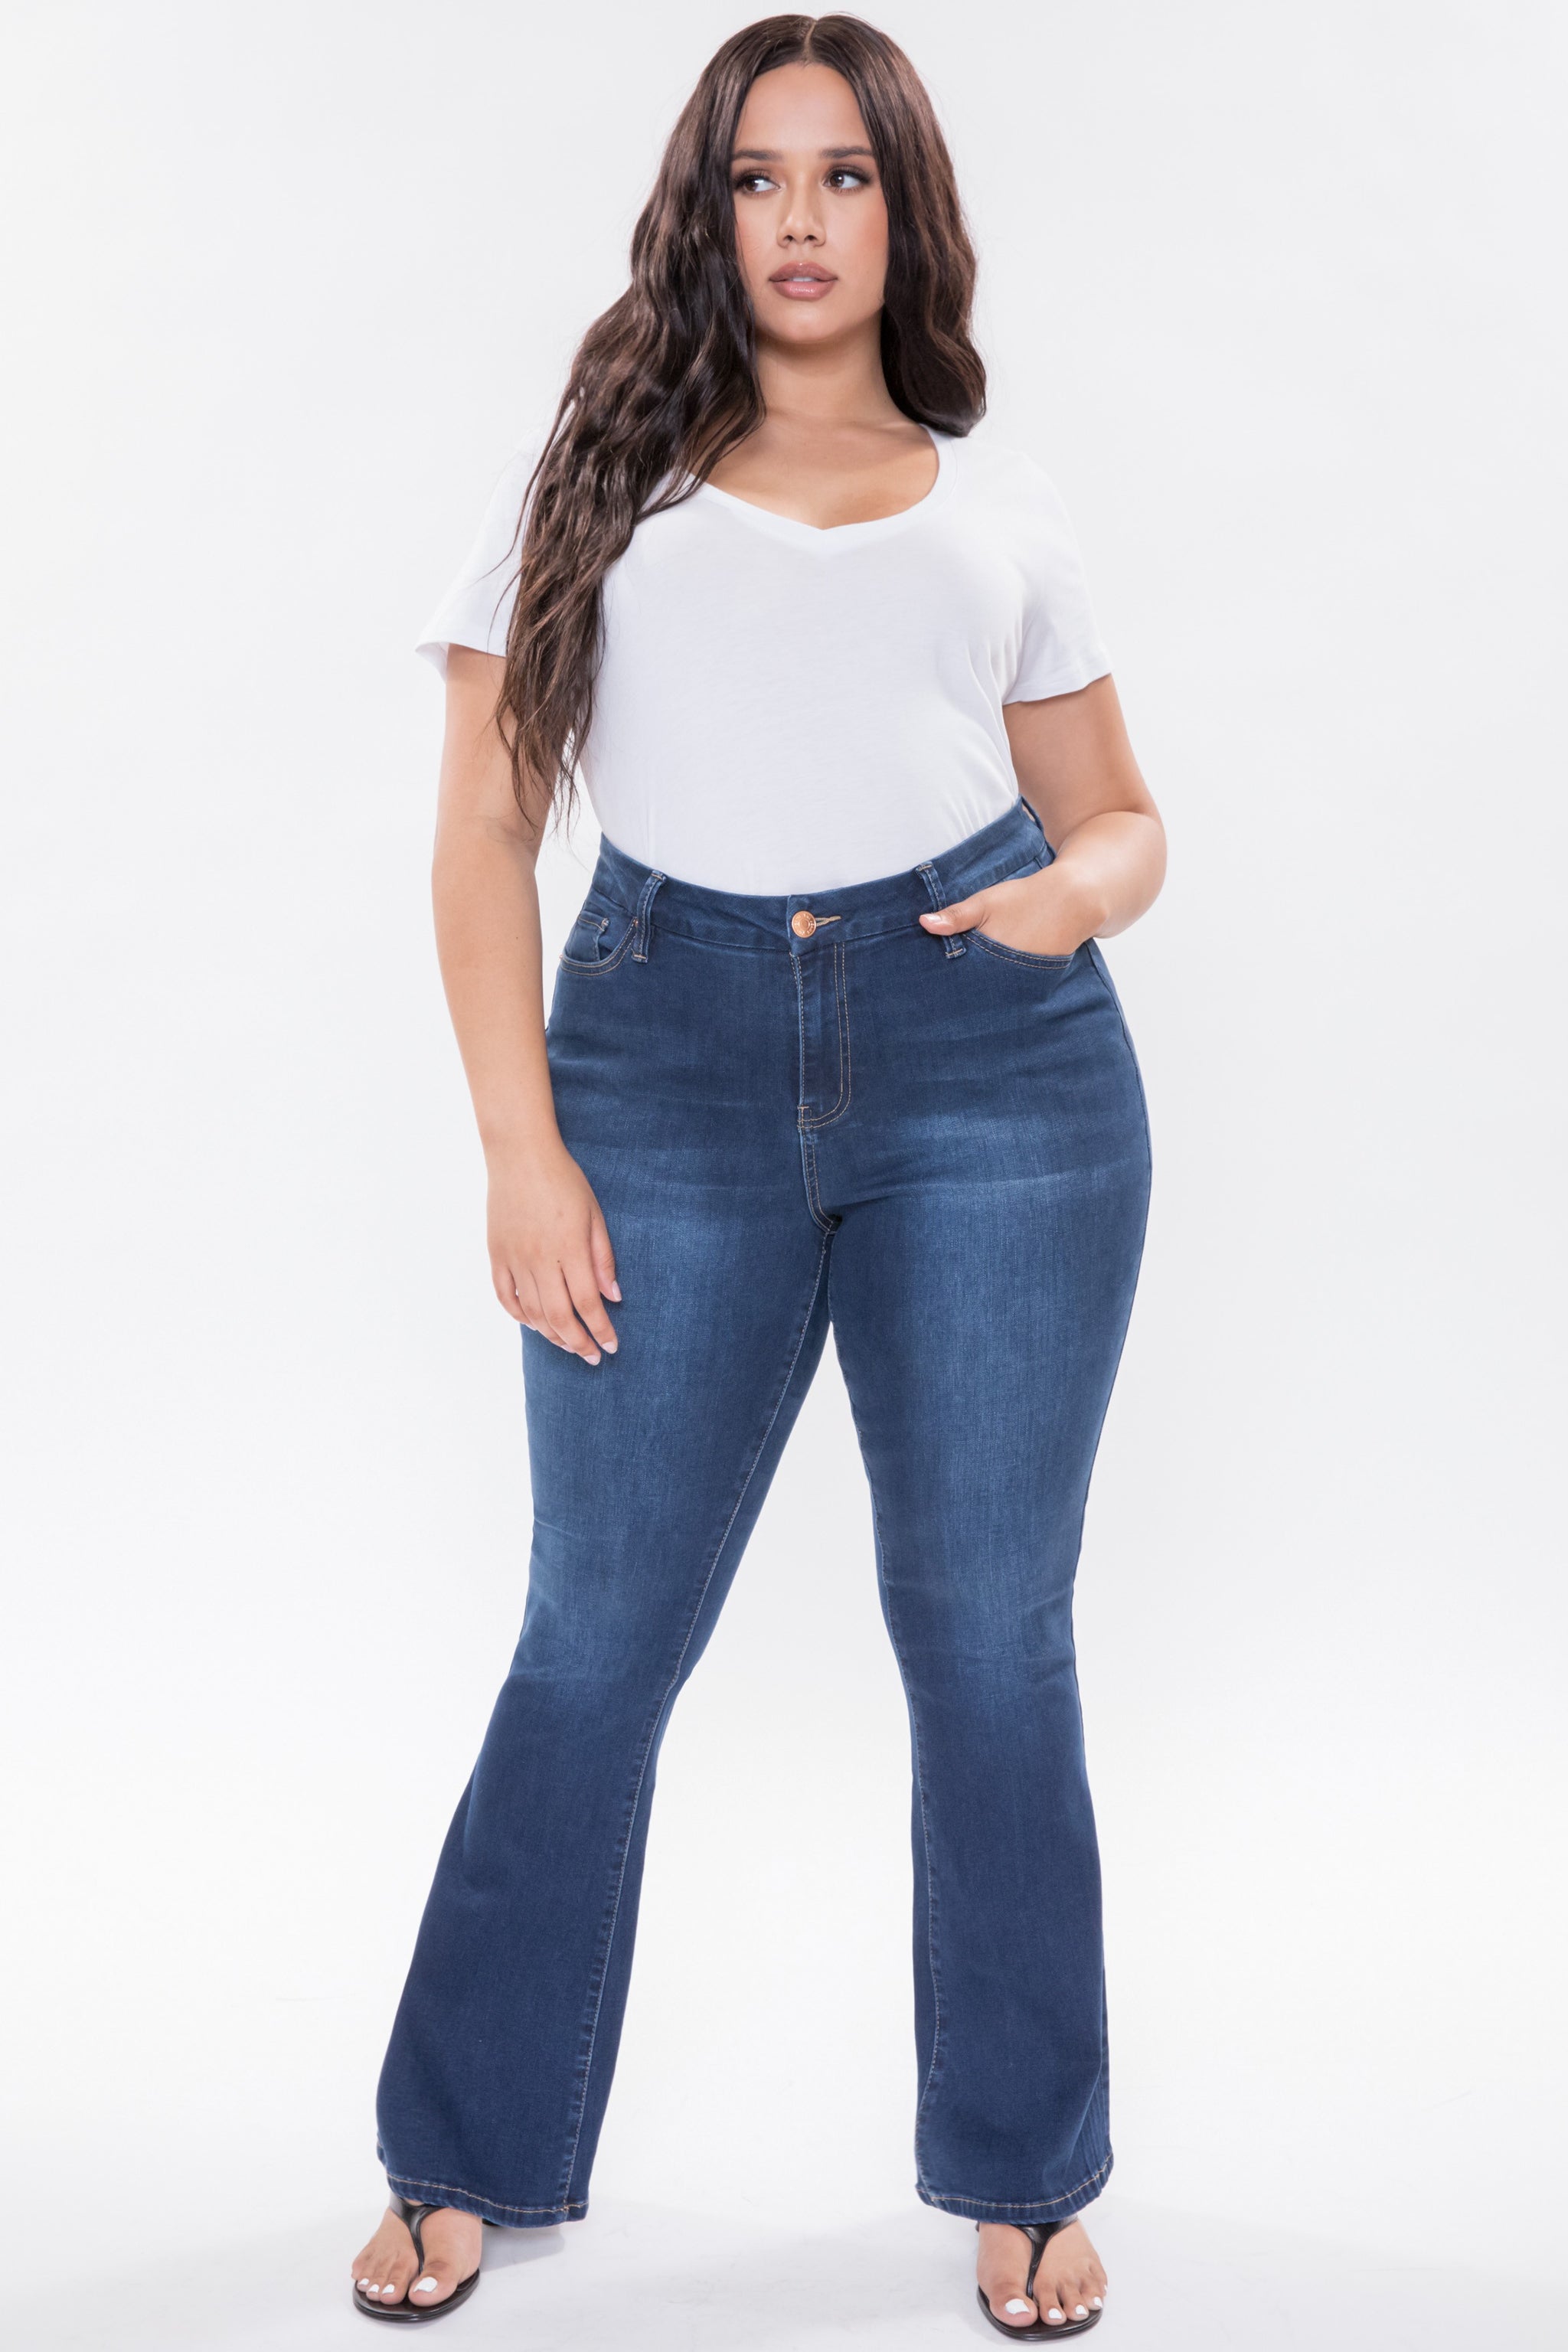 Curvy Girl White Jeans - Angie's Strength & Style Boutique